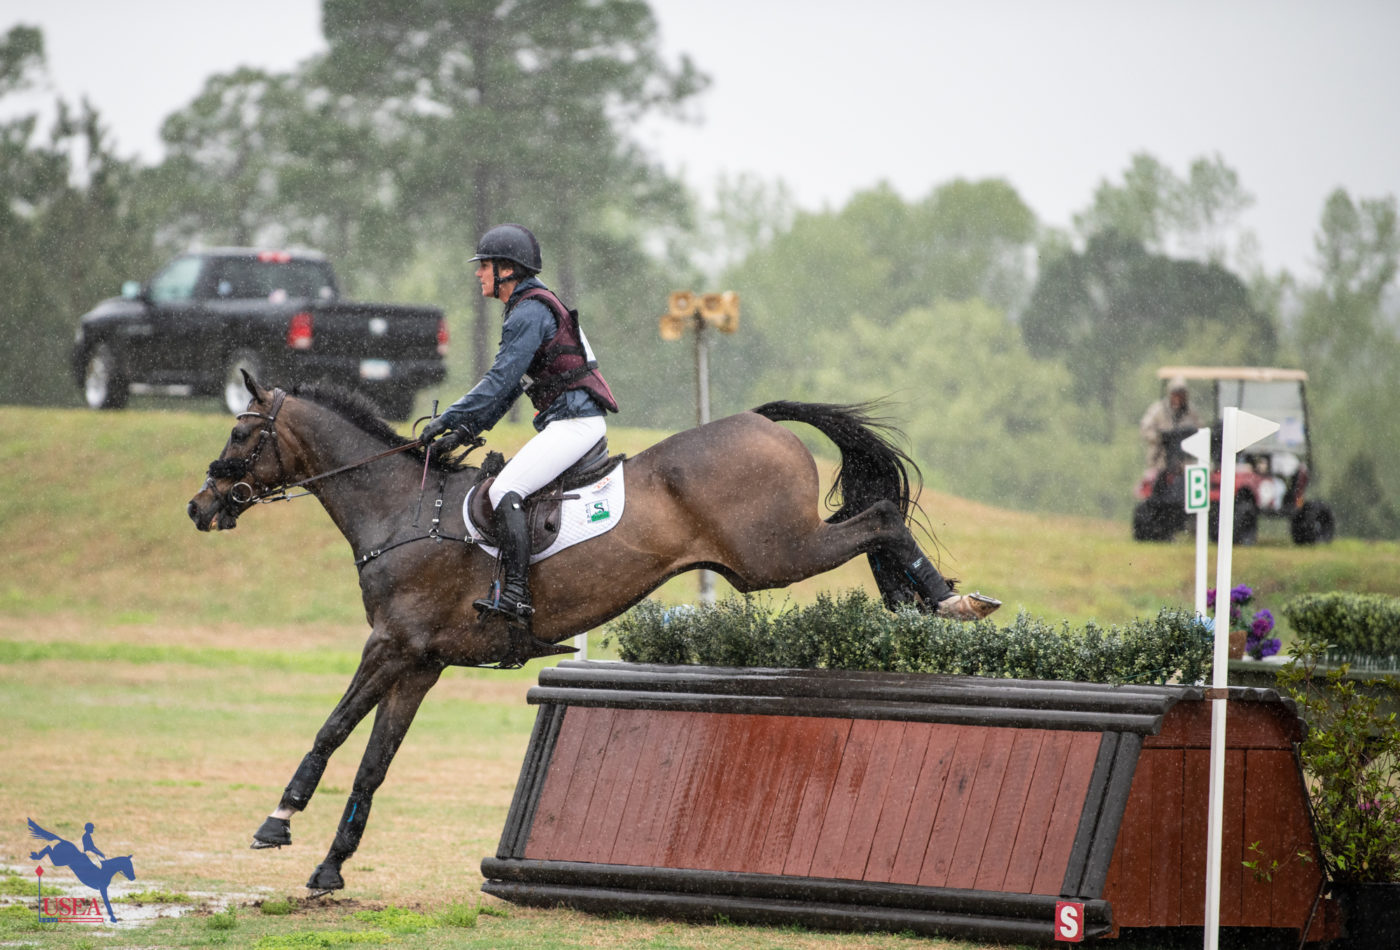 Ariel Grald and Forrest Gump 124 finished fourth in the CCI3*-S. USEA/Lindsay Berreth photo